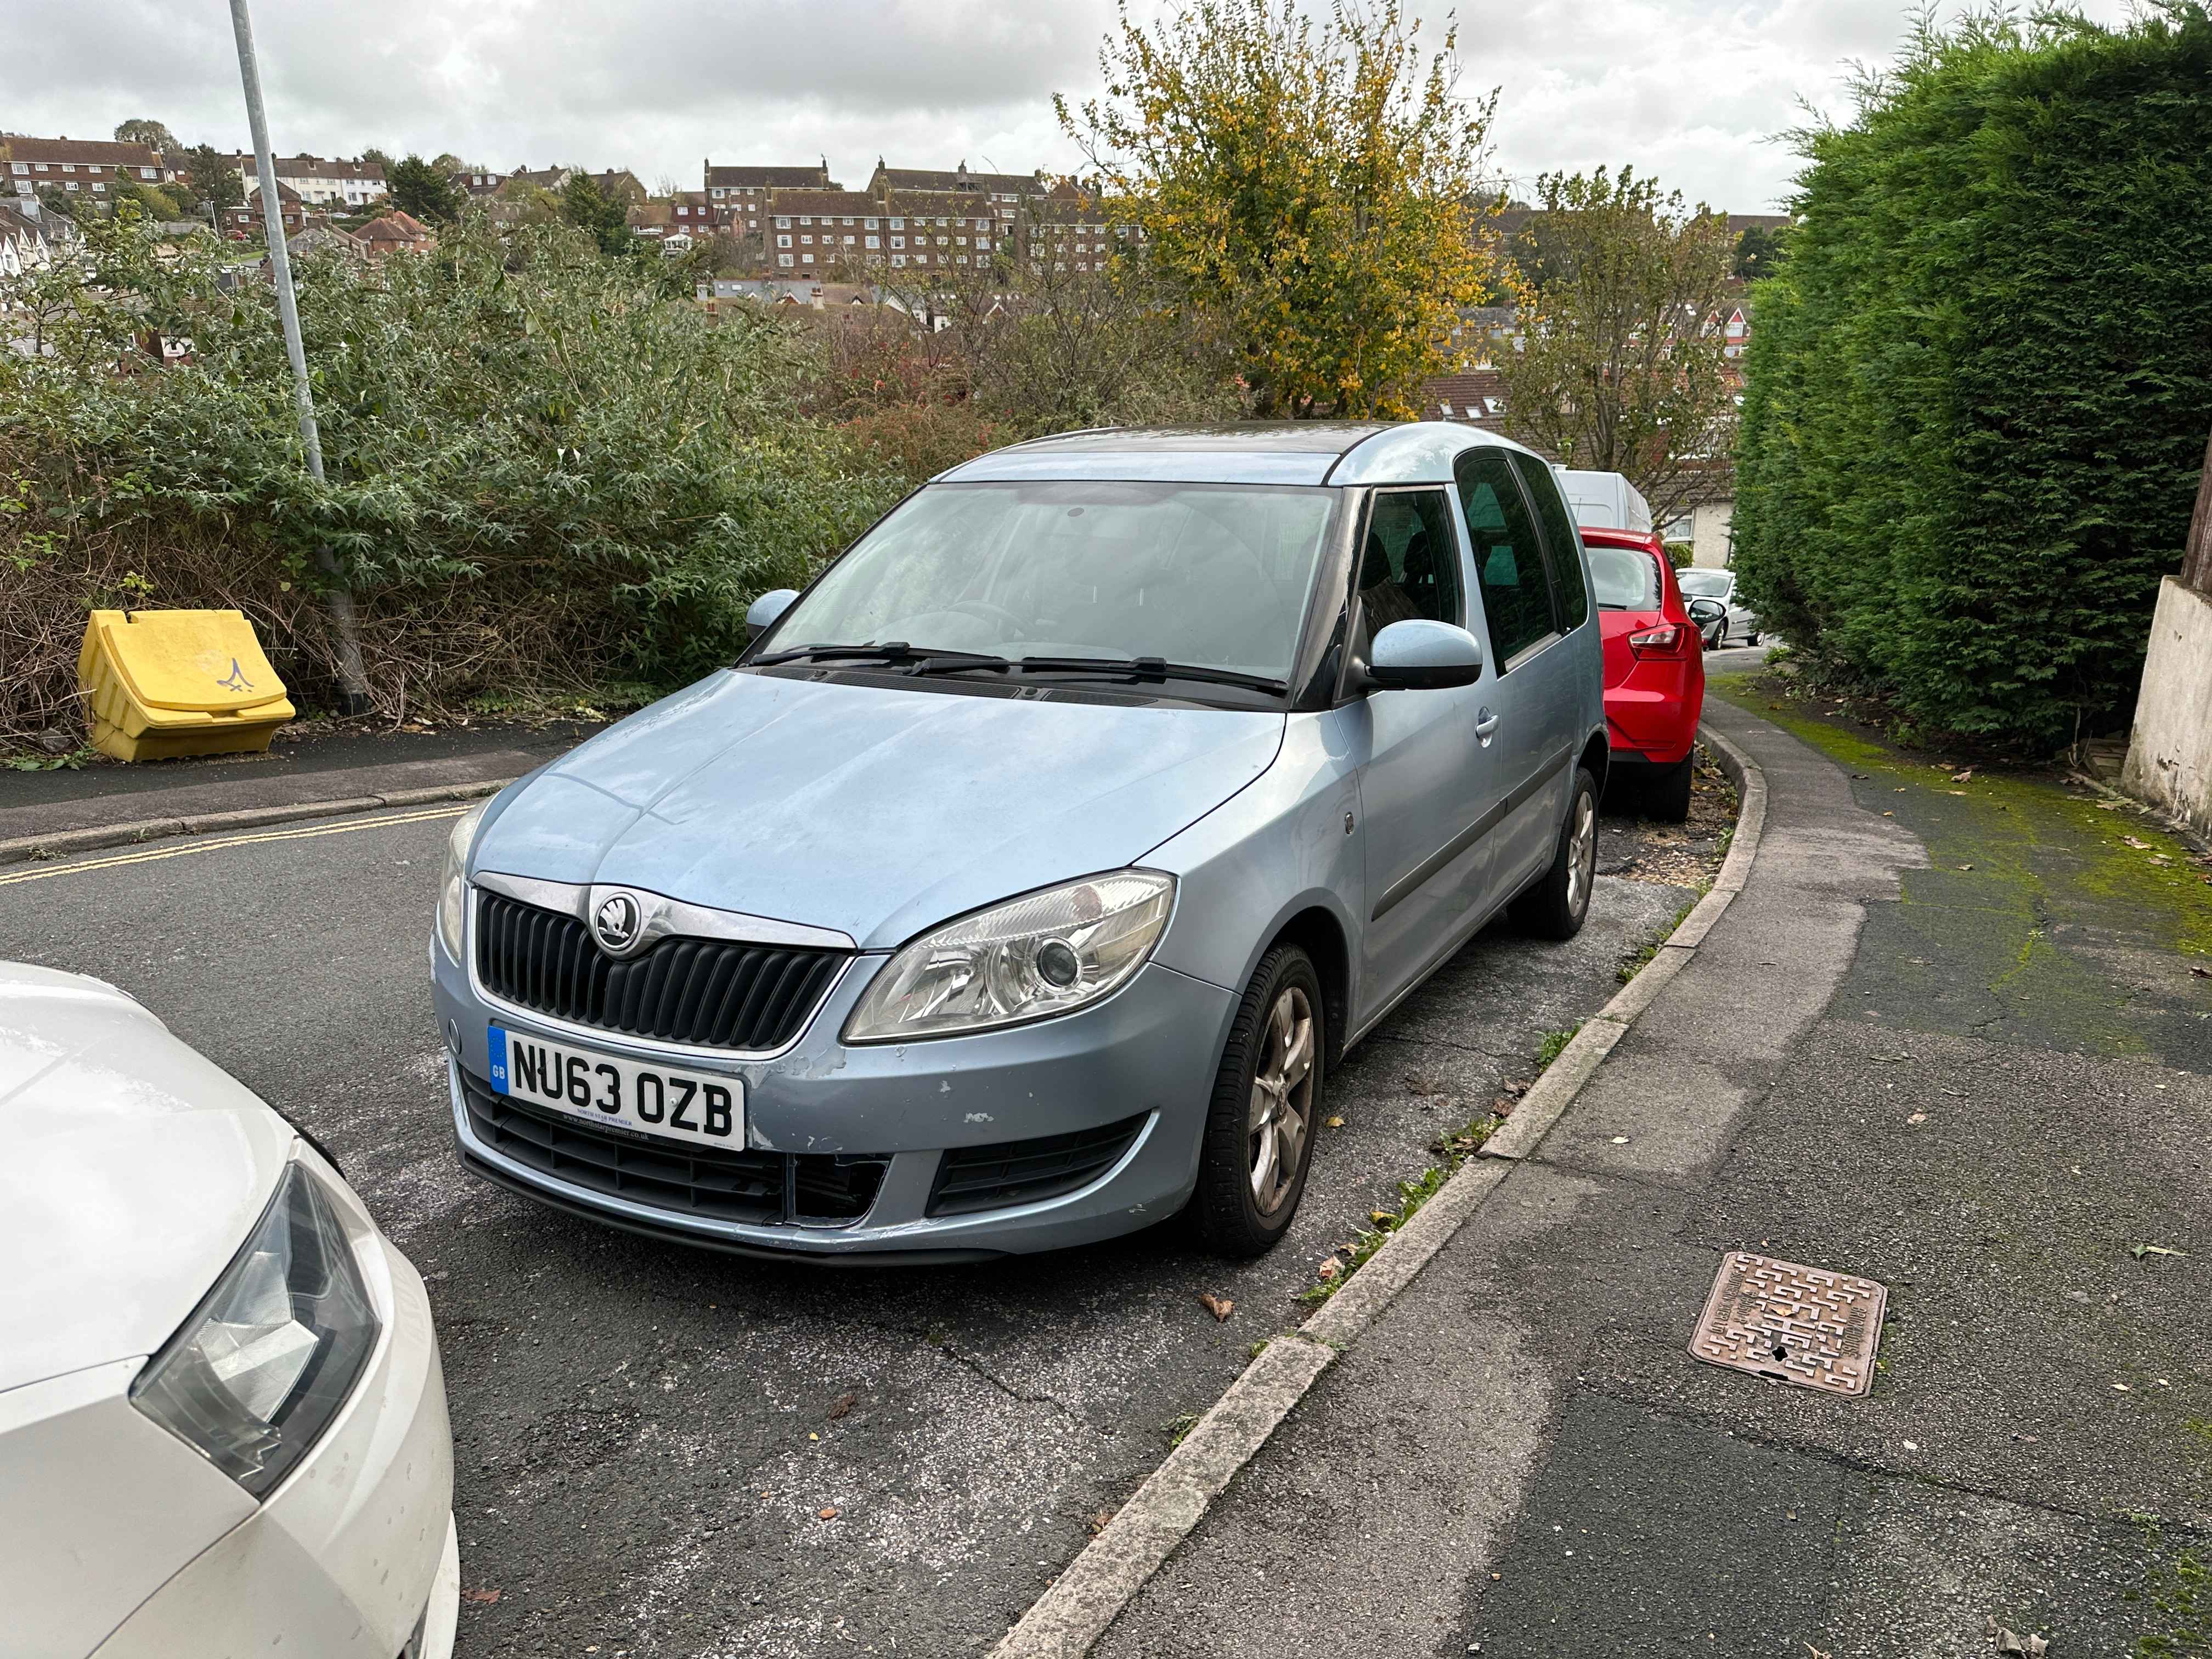 Photograph of NU63 OZB - a Blue Skoda Roomster parked in Hollingdean by a non-resident. The twelfth of nineteen photographs supplied by the residents of Hollingdean.